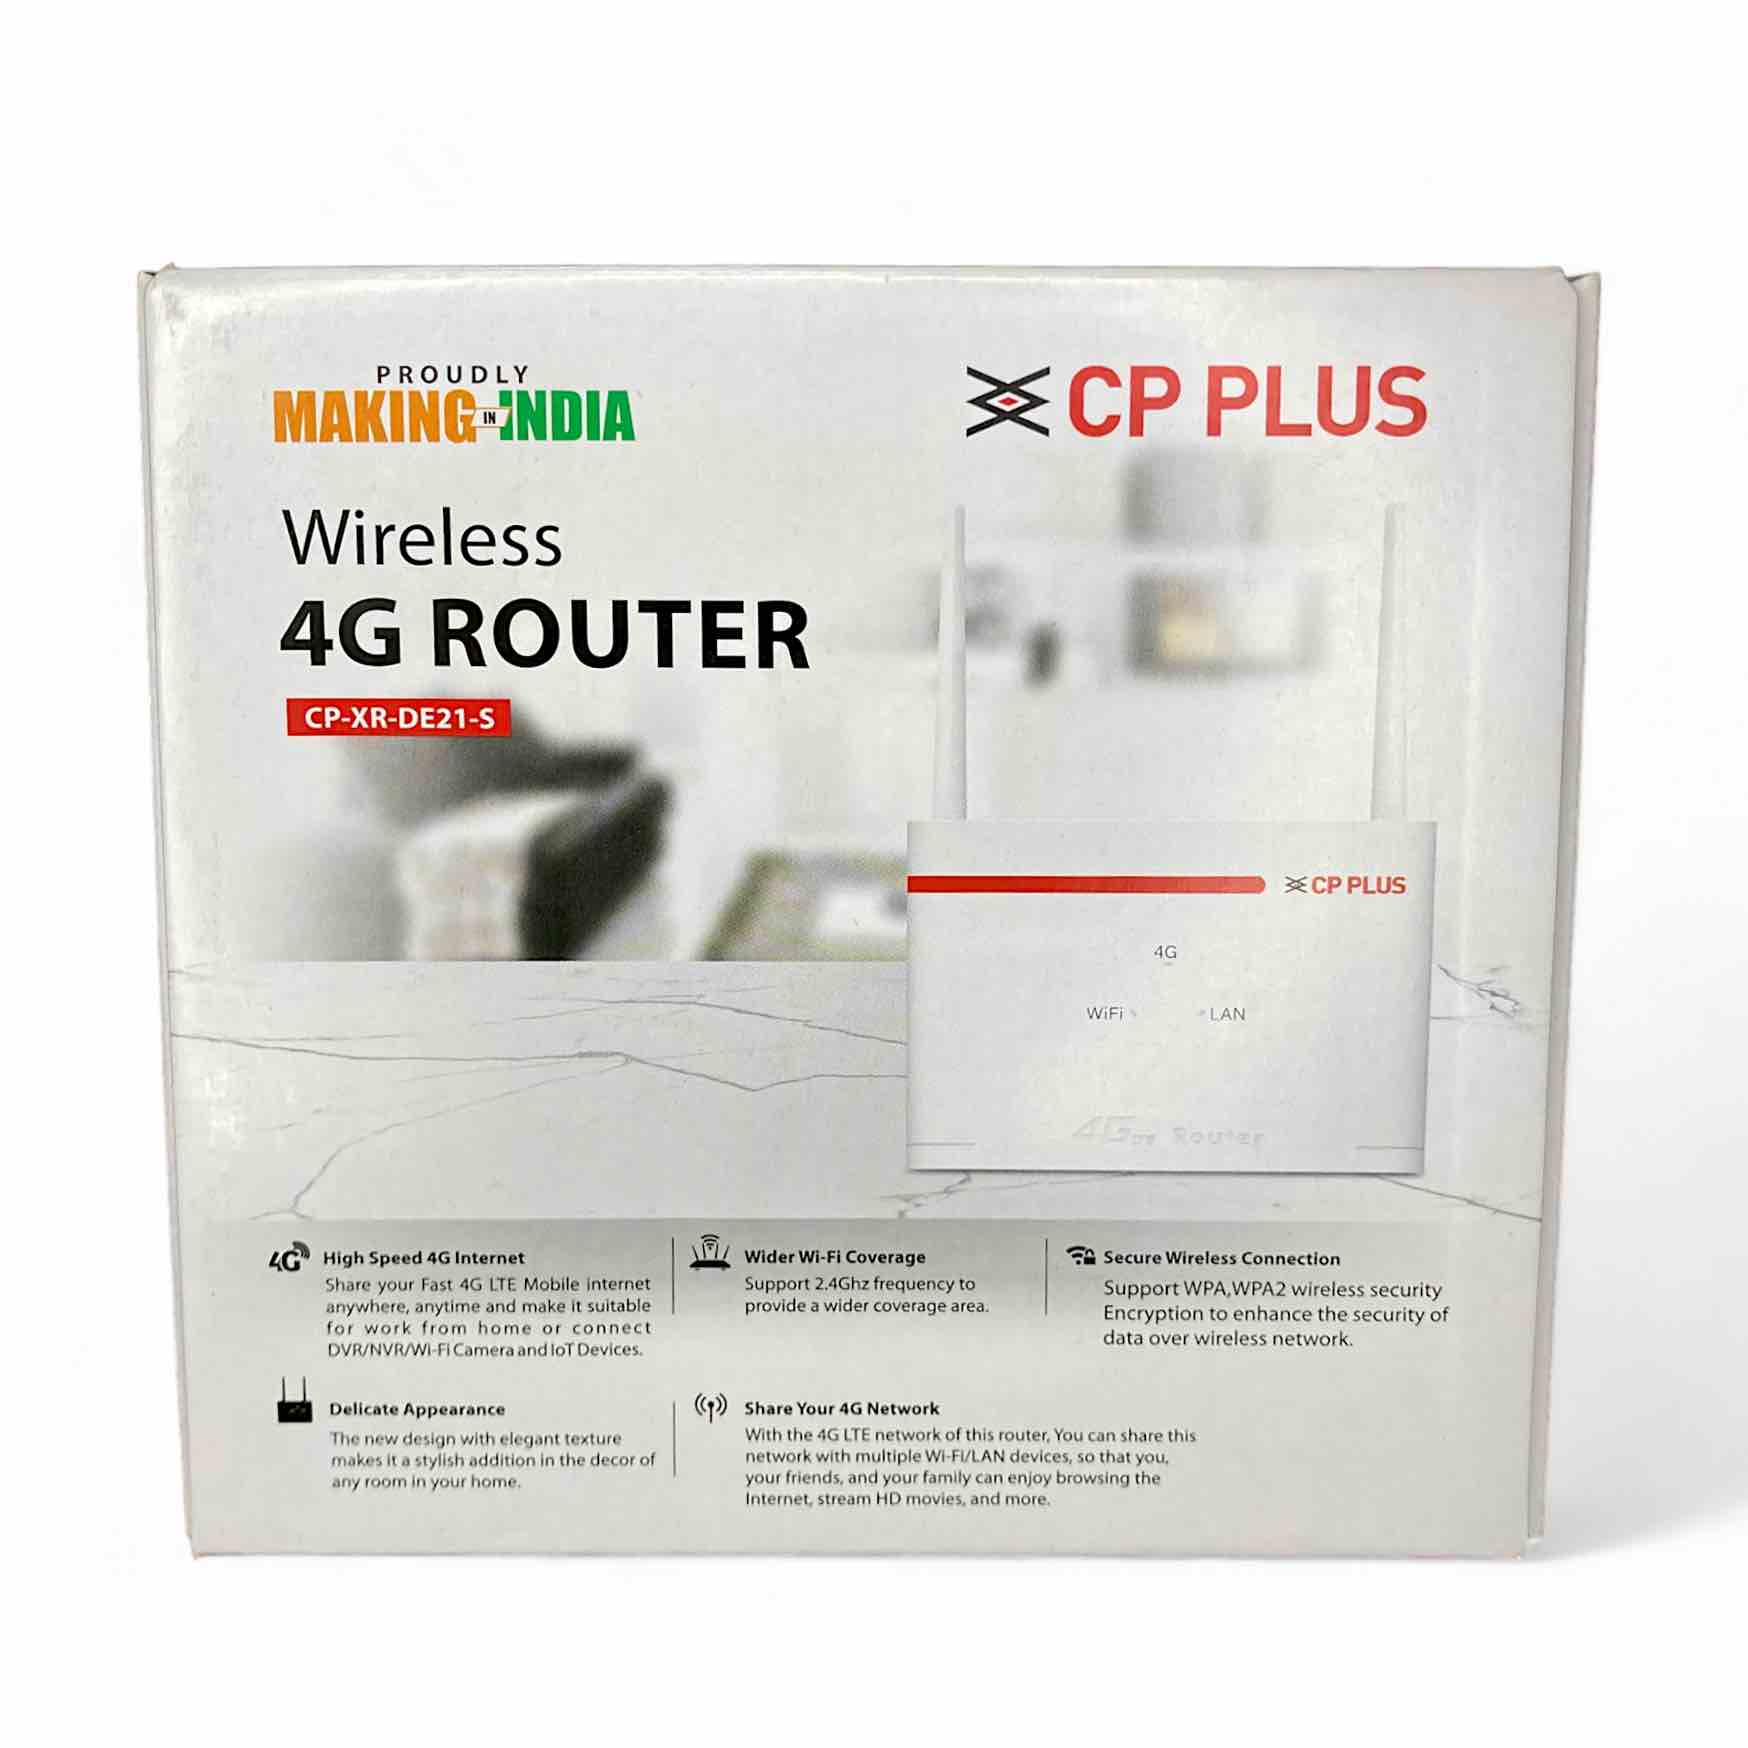 CP Plus 4G SIM Card Wi-Fi Router with High Speed 4G Internet & Wider Wi-Fi Coverage | Support External Antenna | Support Reset, WPS Button - CP-XR-DE21-S